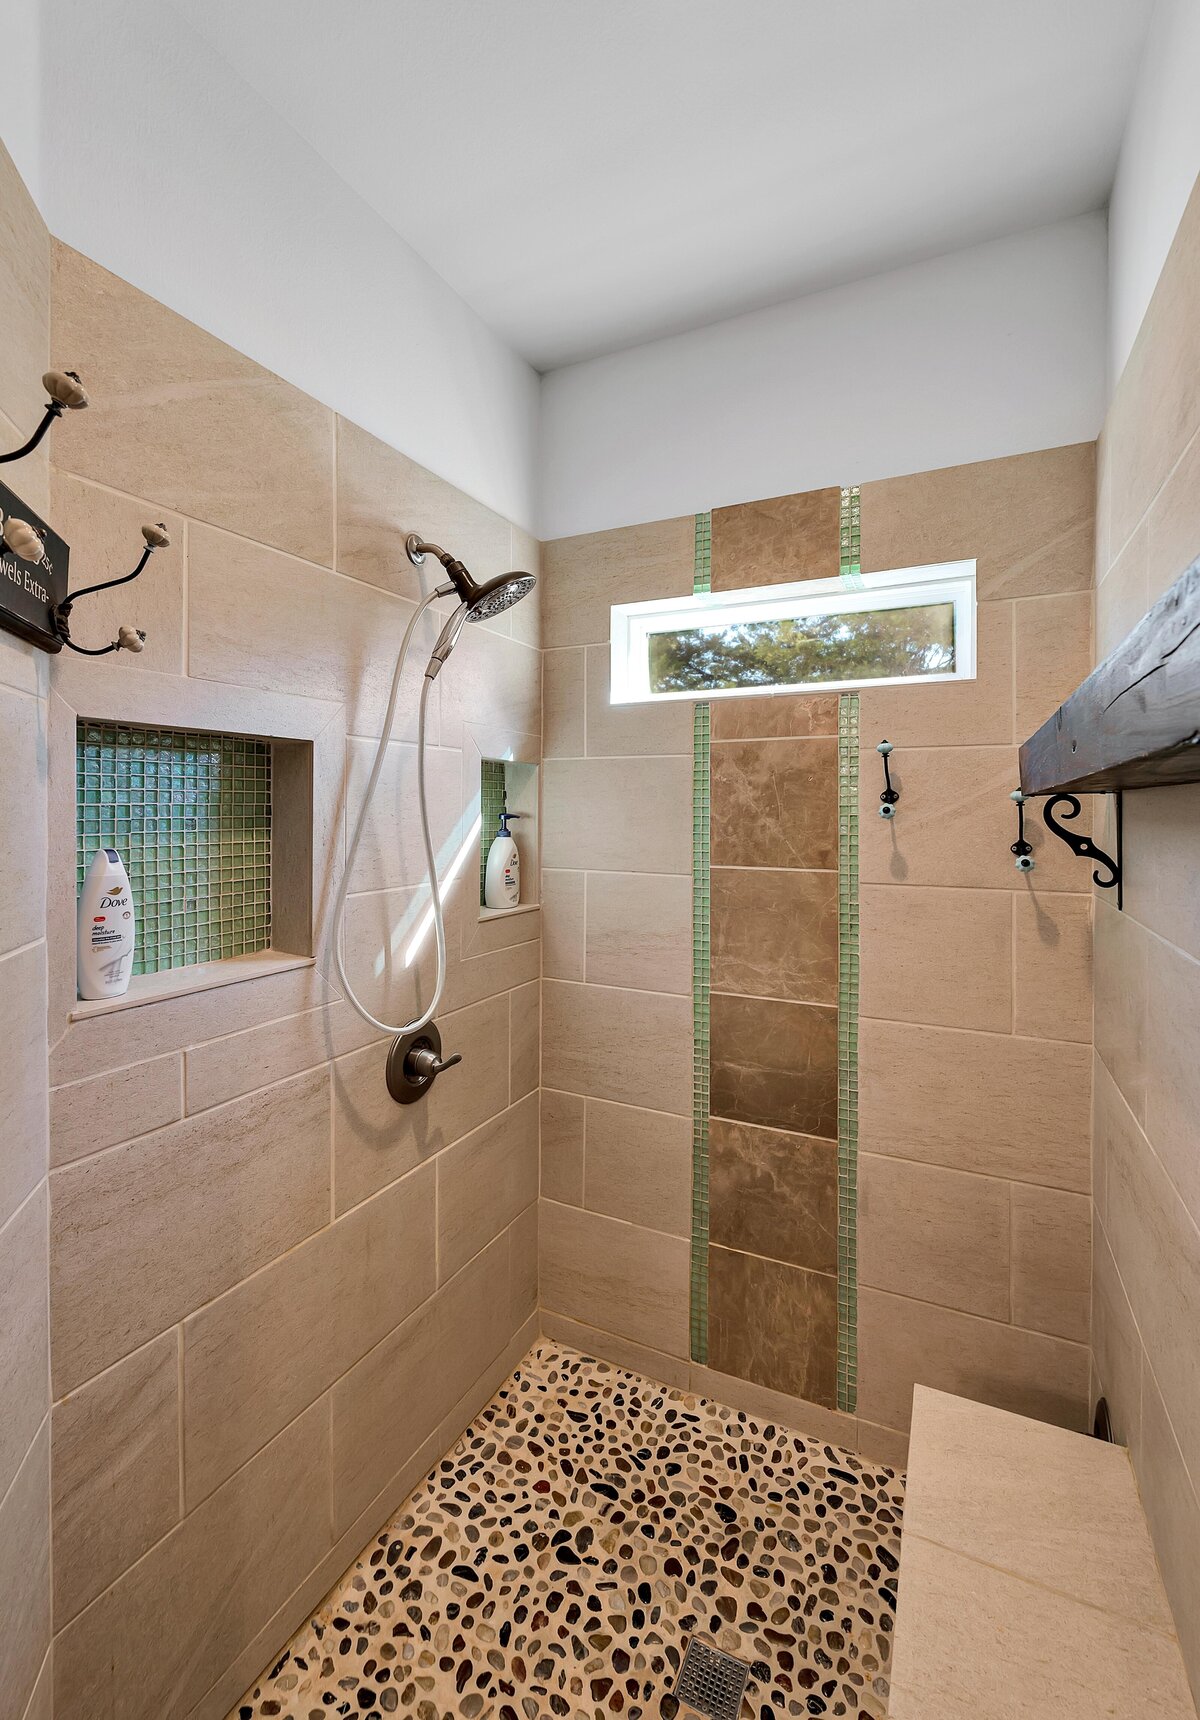 Luxurious tiled walk-in shower in this 7-bedroom, 5-bathroom farmhouse that sleeps 21 on a secluded acreage just 15 minutes from downtown Waco, TX